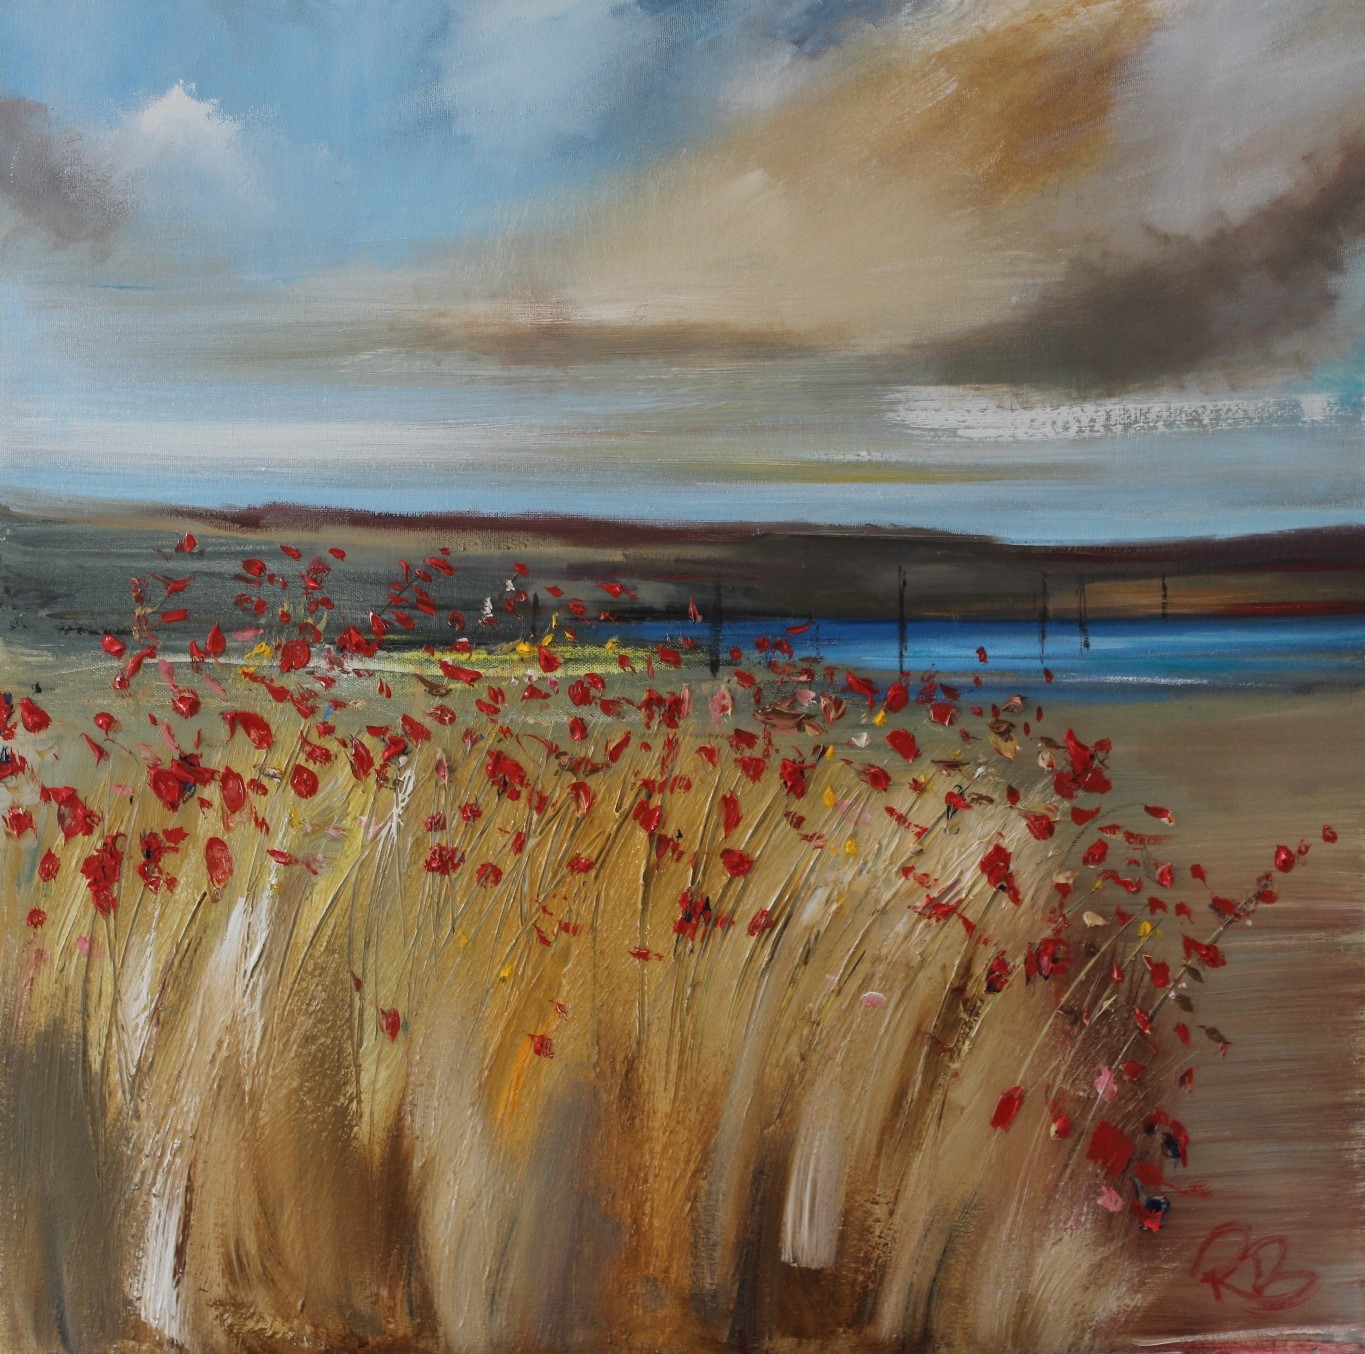 'A Gathering of Poppies' by artist Rosanne Barr